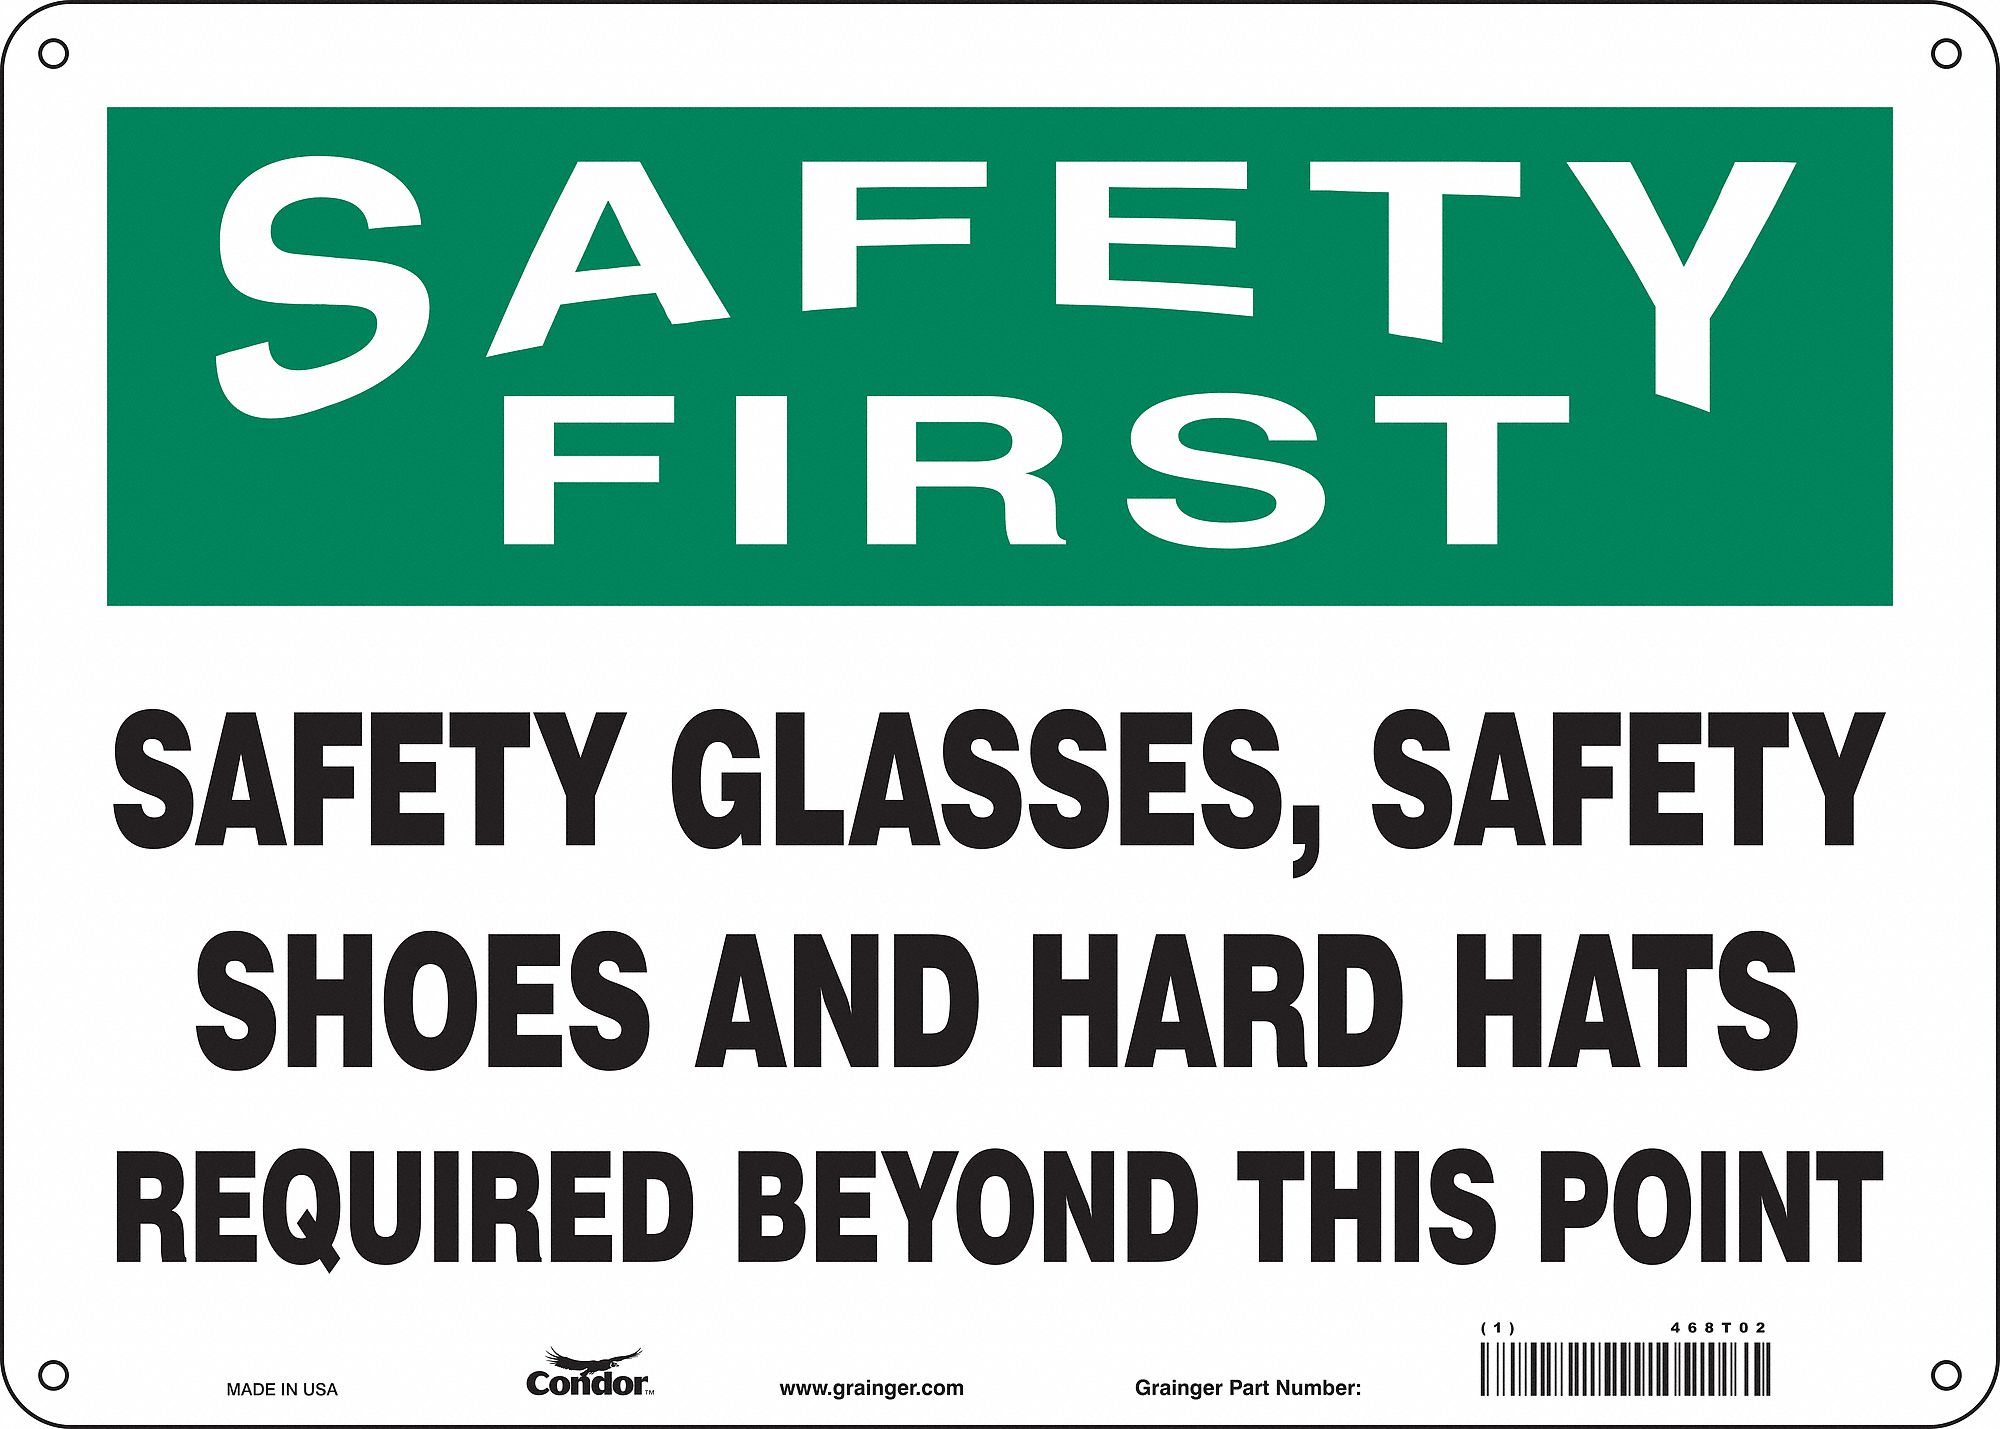 Hard Hat Required Beyond This Point Made in the USA OSHA SAFETY FIRST Sign 